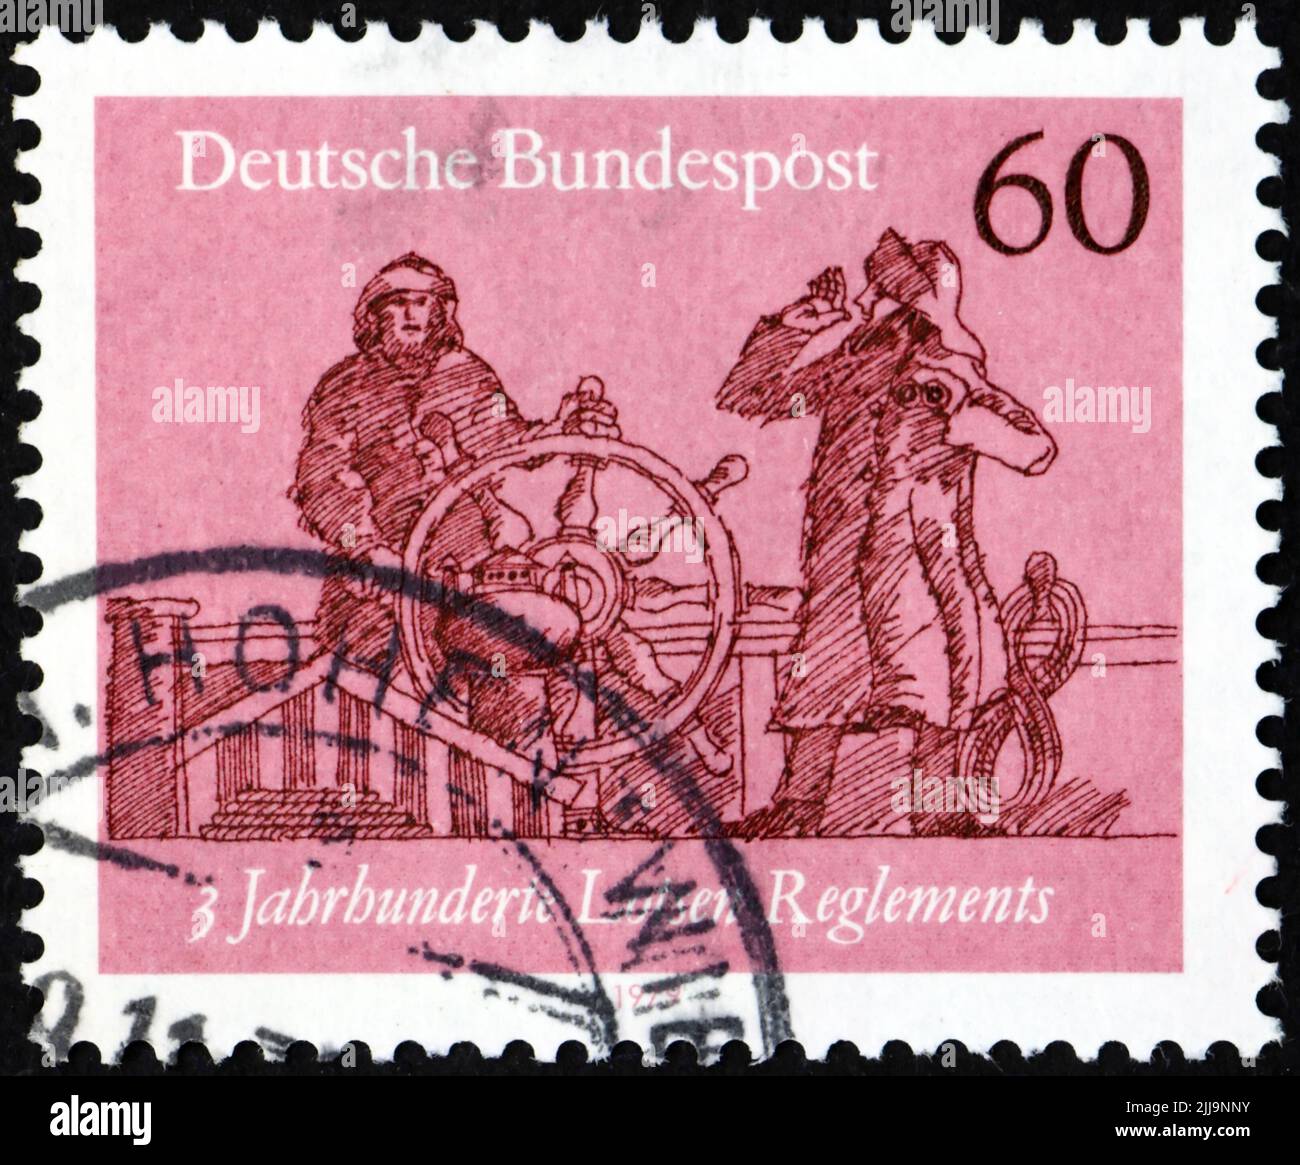 GERMANY - CIRCA 1979: a stamp printed in Germany shows pilot on board, three centuries of pilots regulations, circa 1979 Stock Photo